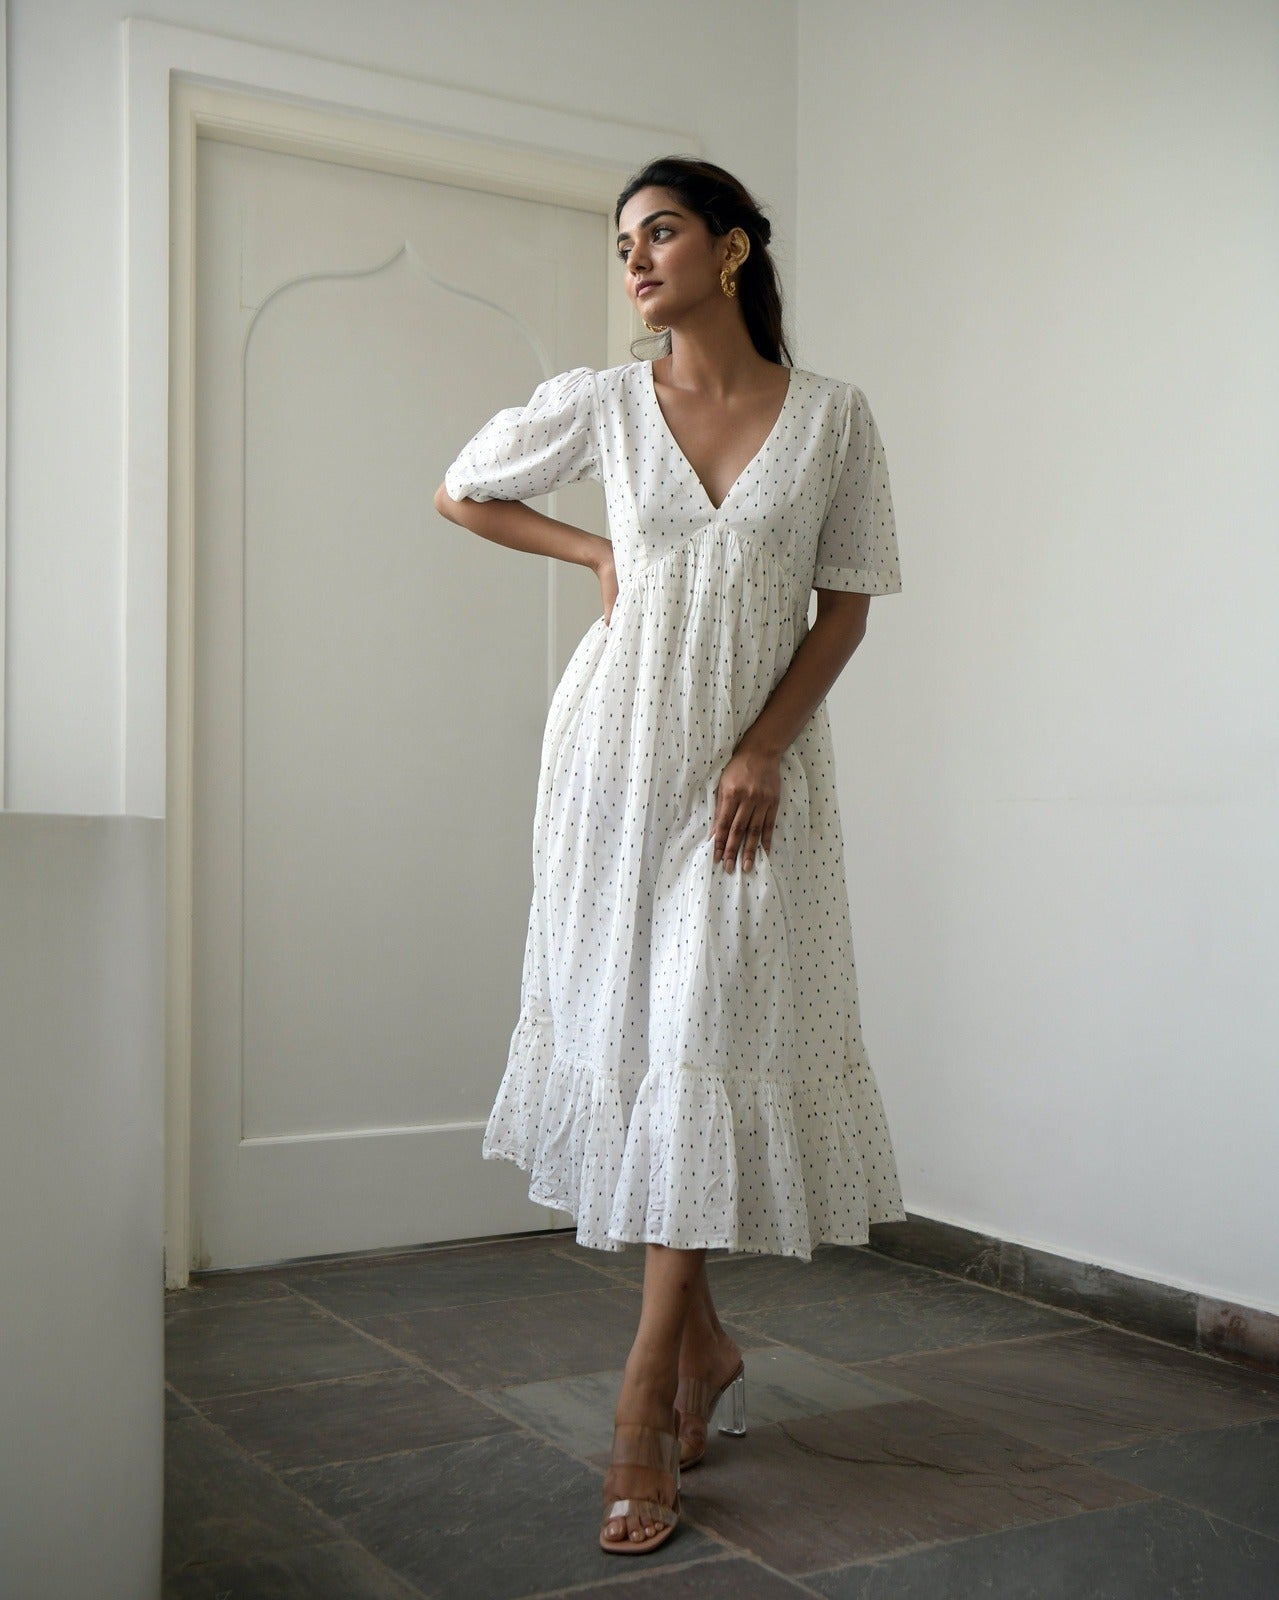 White Georgette Smocked Midi Dress with Short Puff Sleeves and Square Neck